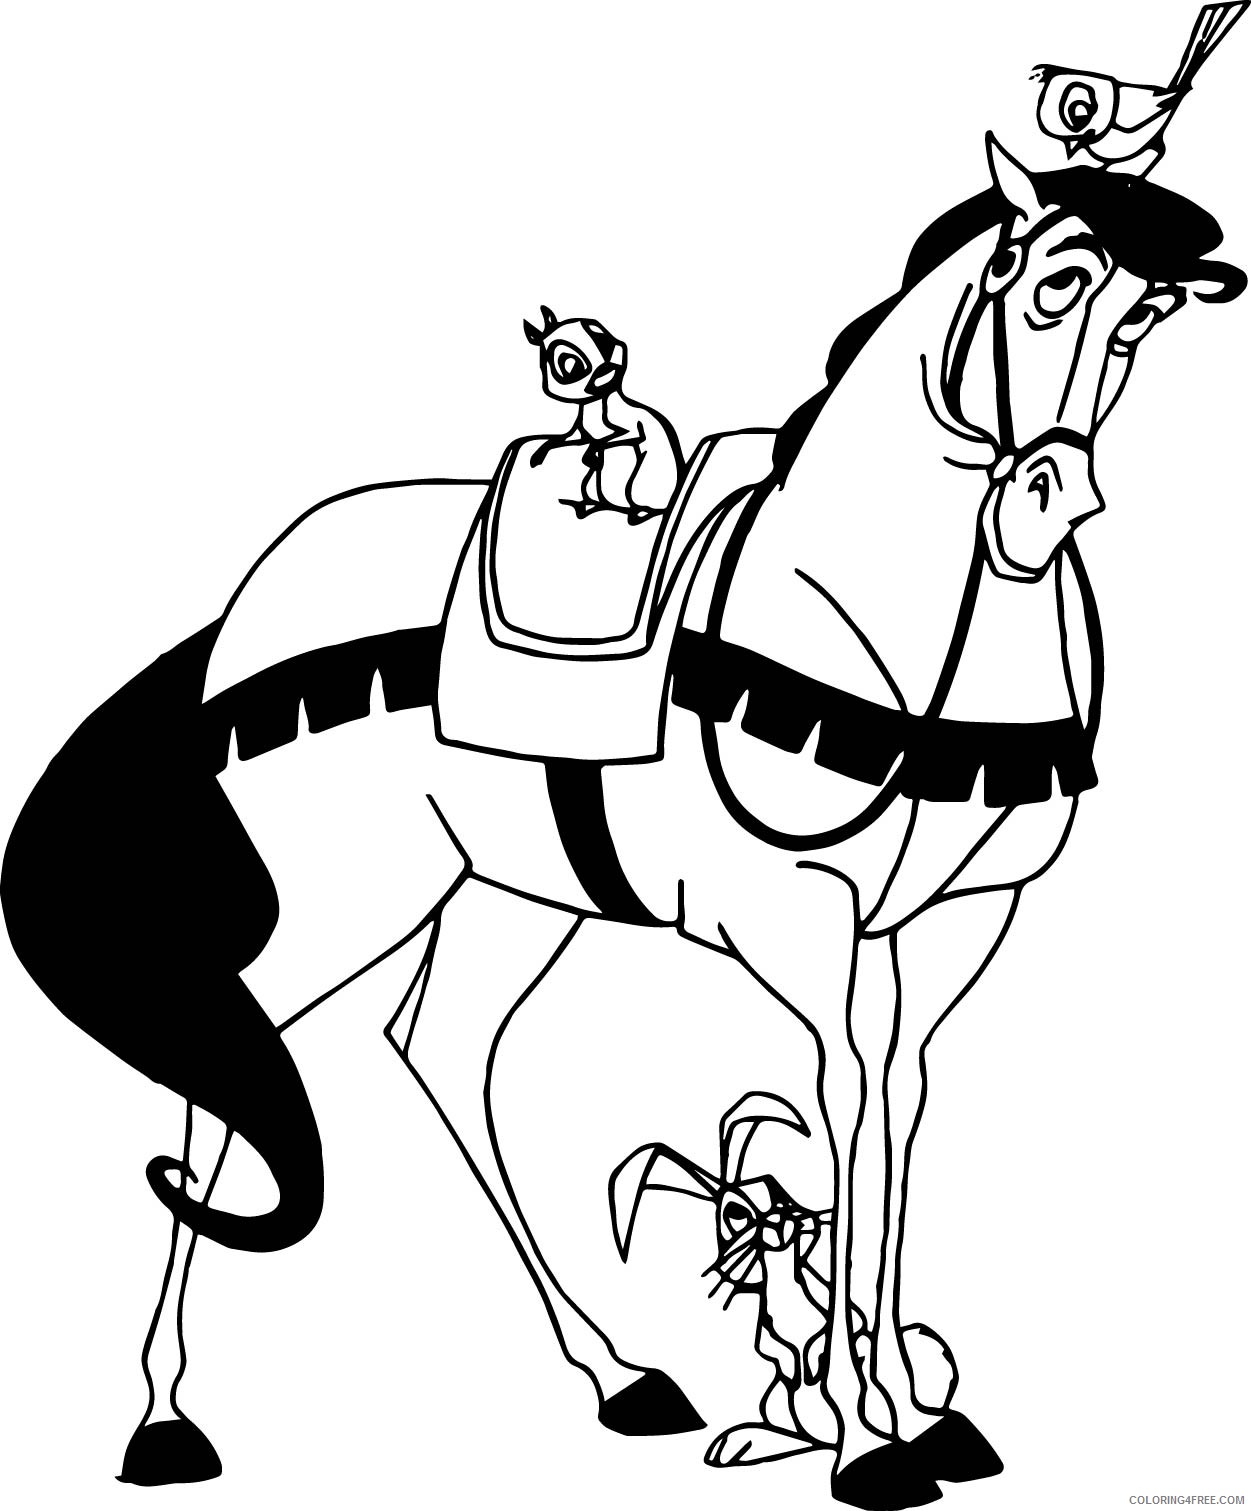 aurora coloring pages samson the horse Coloring4free